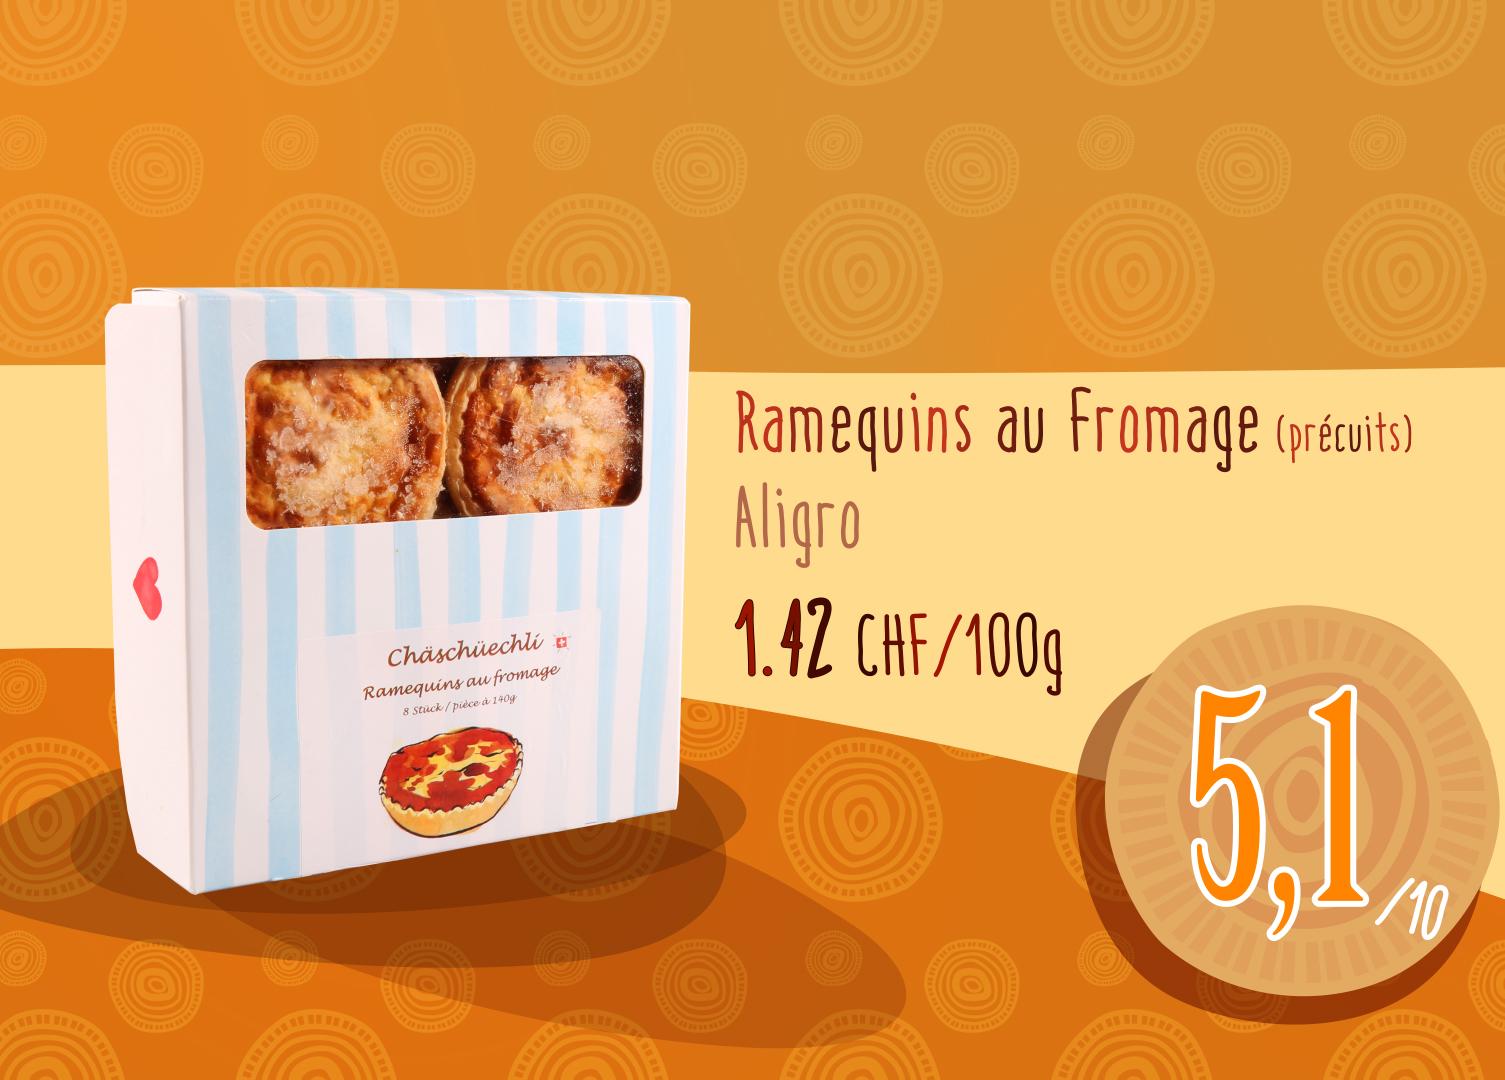 Ramequins au Fromage - Aligro.